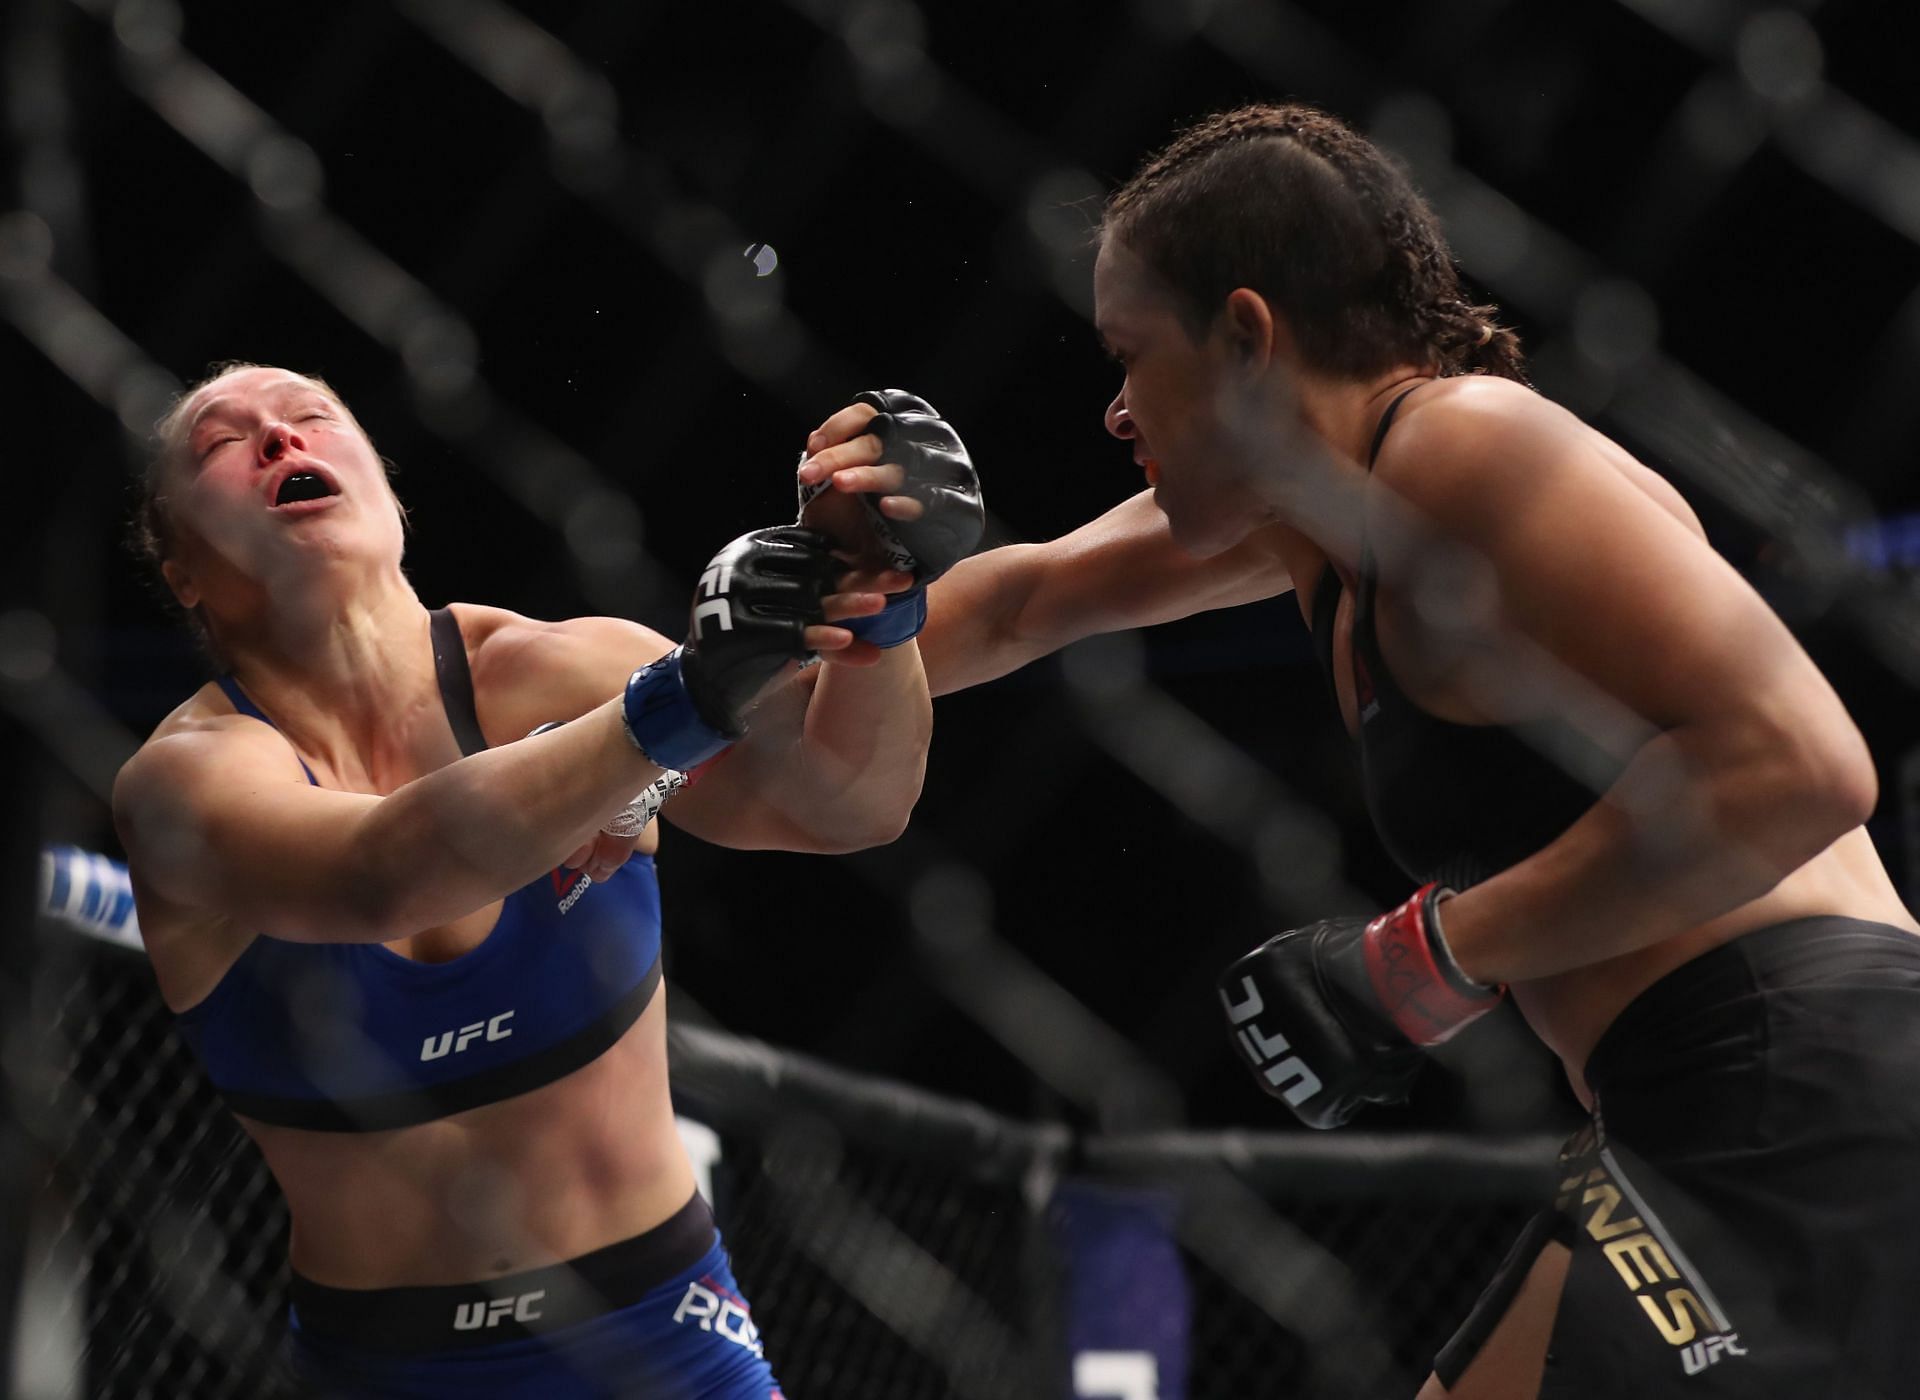 Nunes has defeated seven former UFC champions, including Ronda Rousey